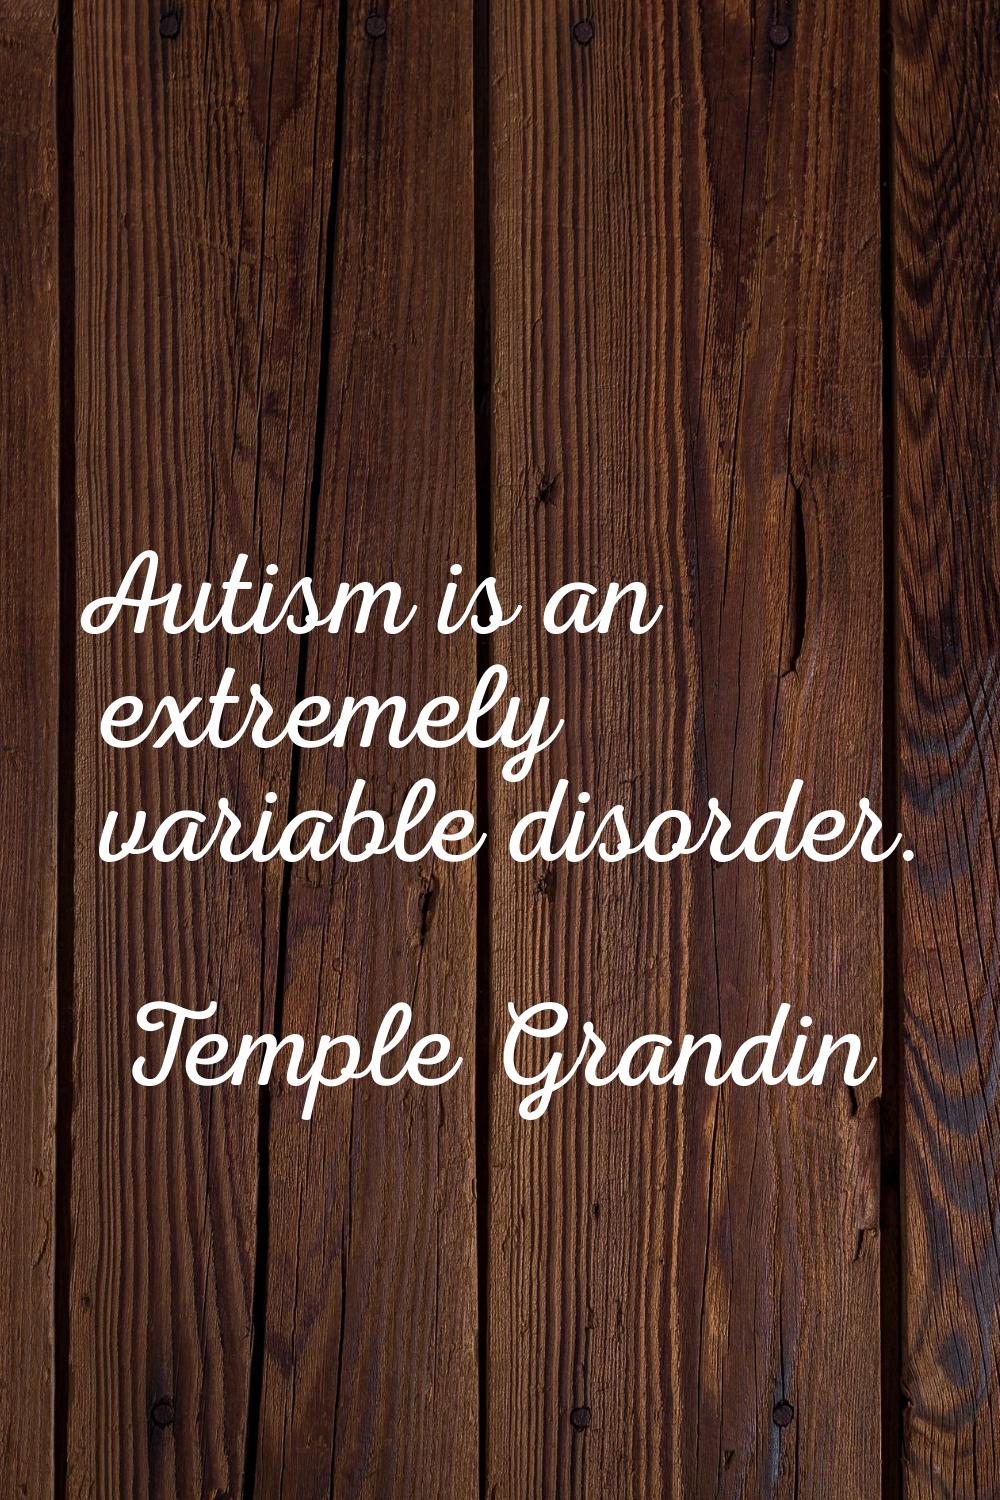 Autism is an extremely variable disorder.